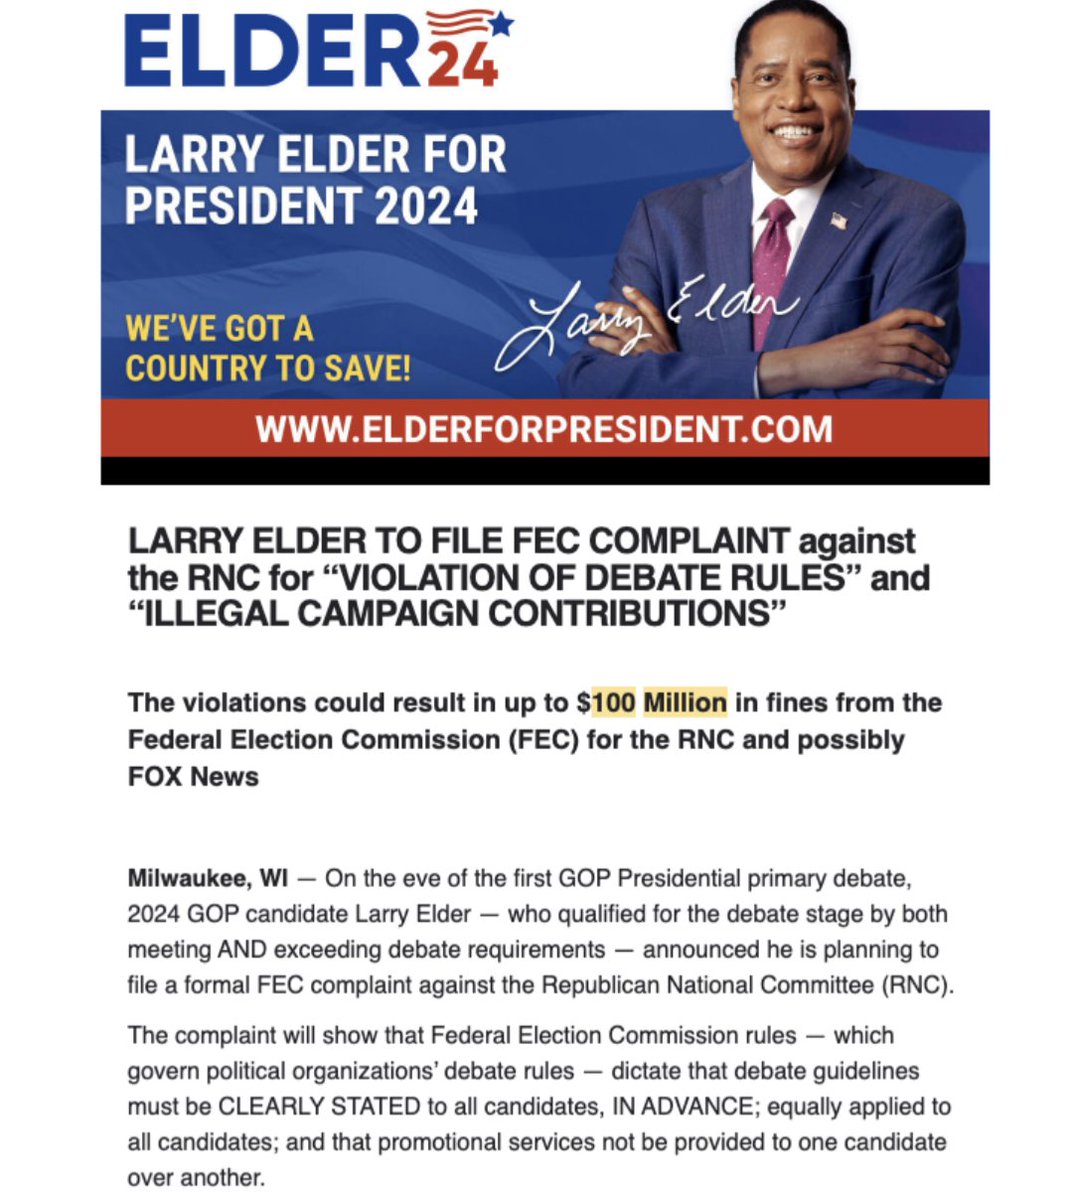 If the RNC does not reverse their decision by 2pm CT and acknowledge that I met all criteria for entry into the presidential debate, I intend to file an FEC complaint for violation of debate rules and illegal campaign contributions. FEC rules governing debates are clear that…